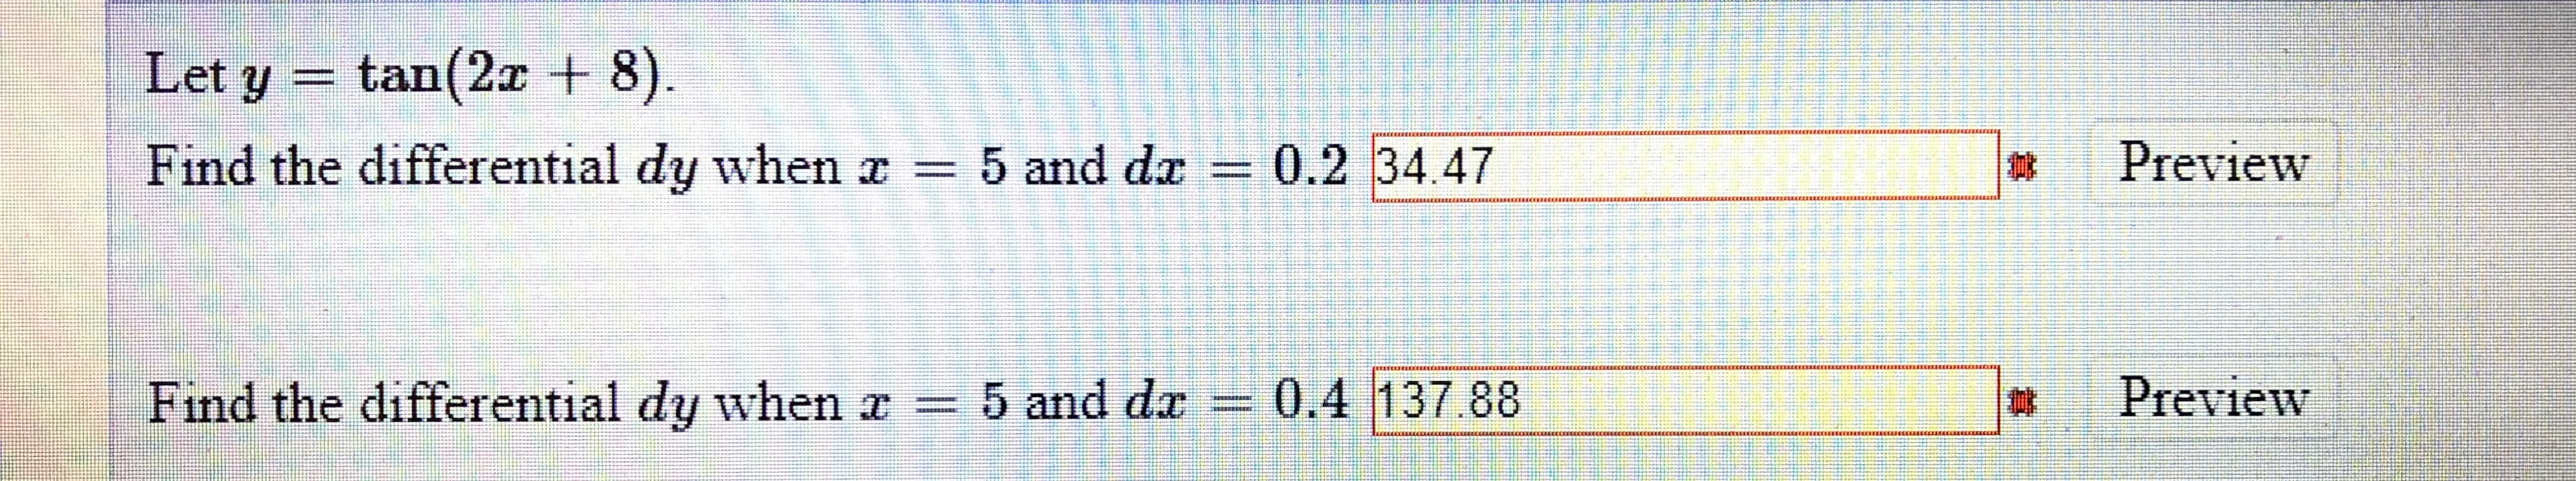 Let y = tan(2a + 8).
.
Find the differential dy when a = 5 and da = 0.2 34.47
Preview
Find the differential dy when a = 5 and da
0.4 137.88
%23
Preview
